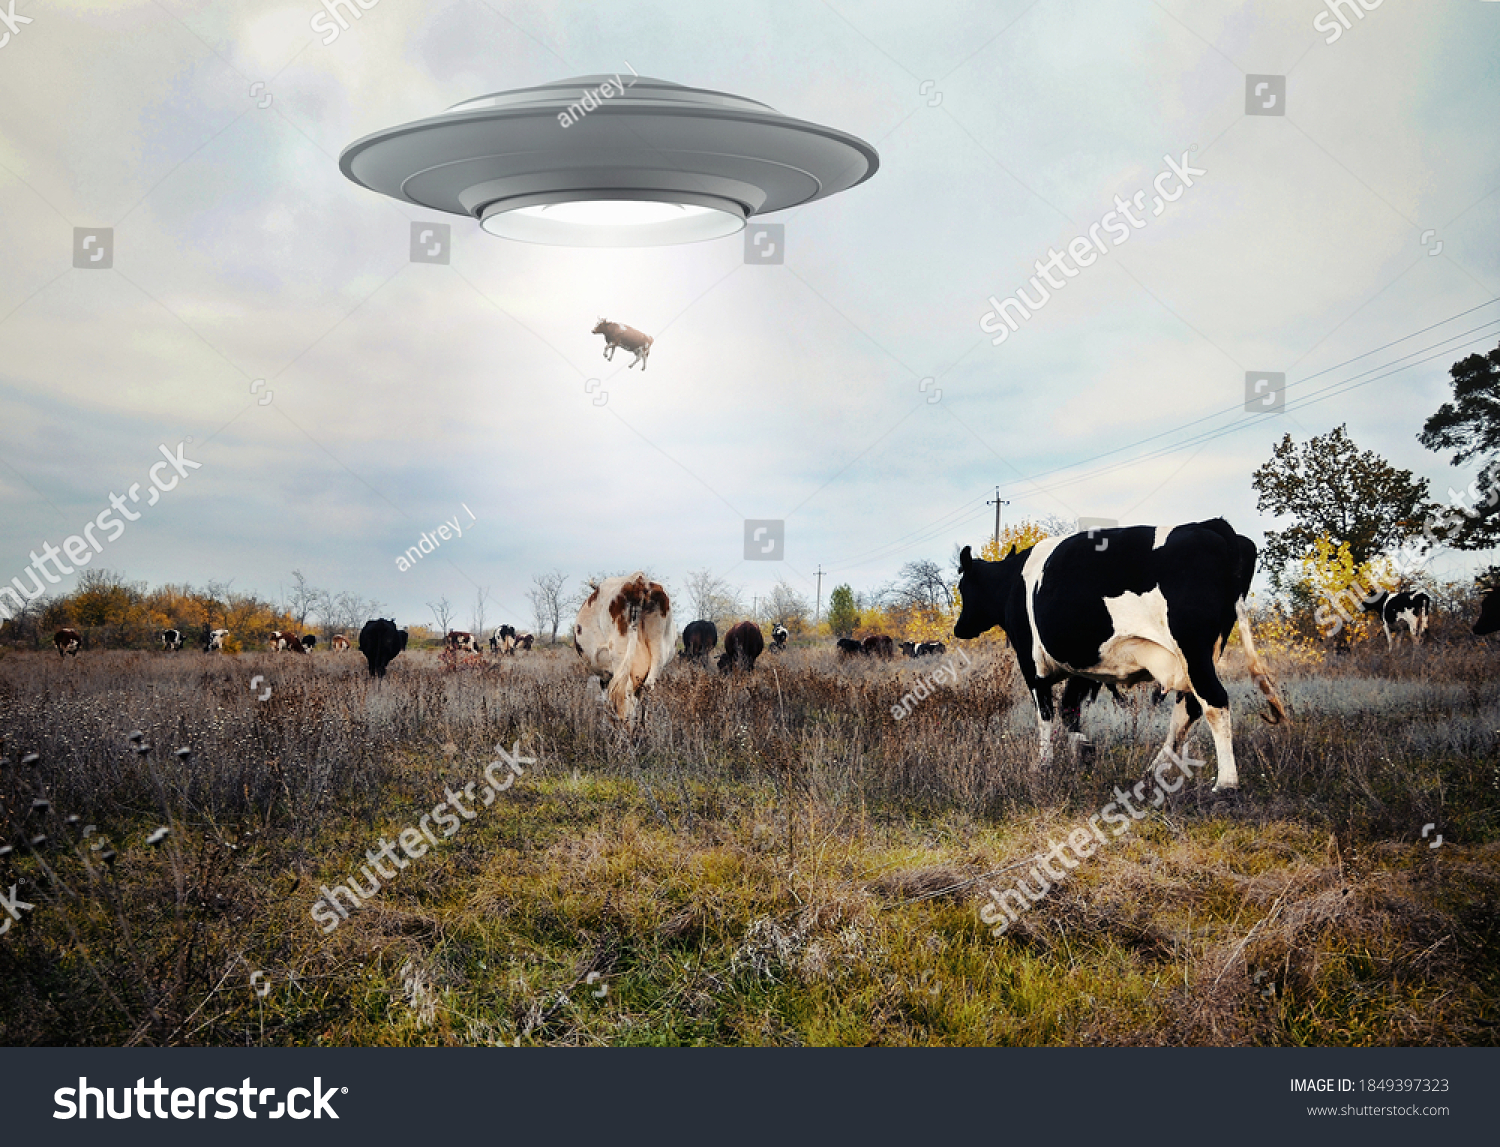 Landscape with cows and UFO. Photo with 3d rendering element  #1849397323